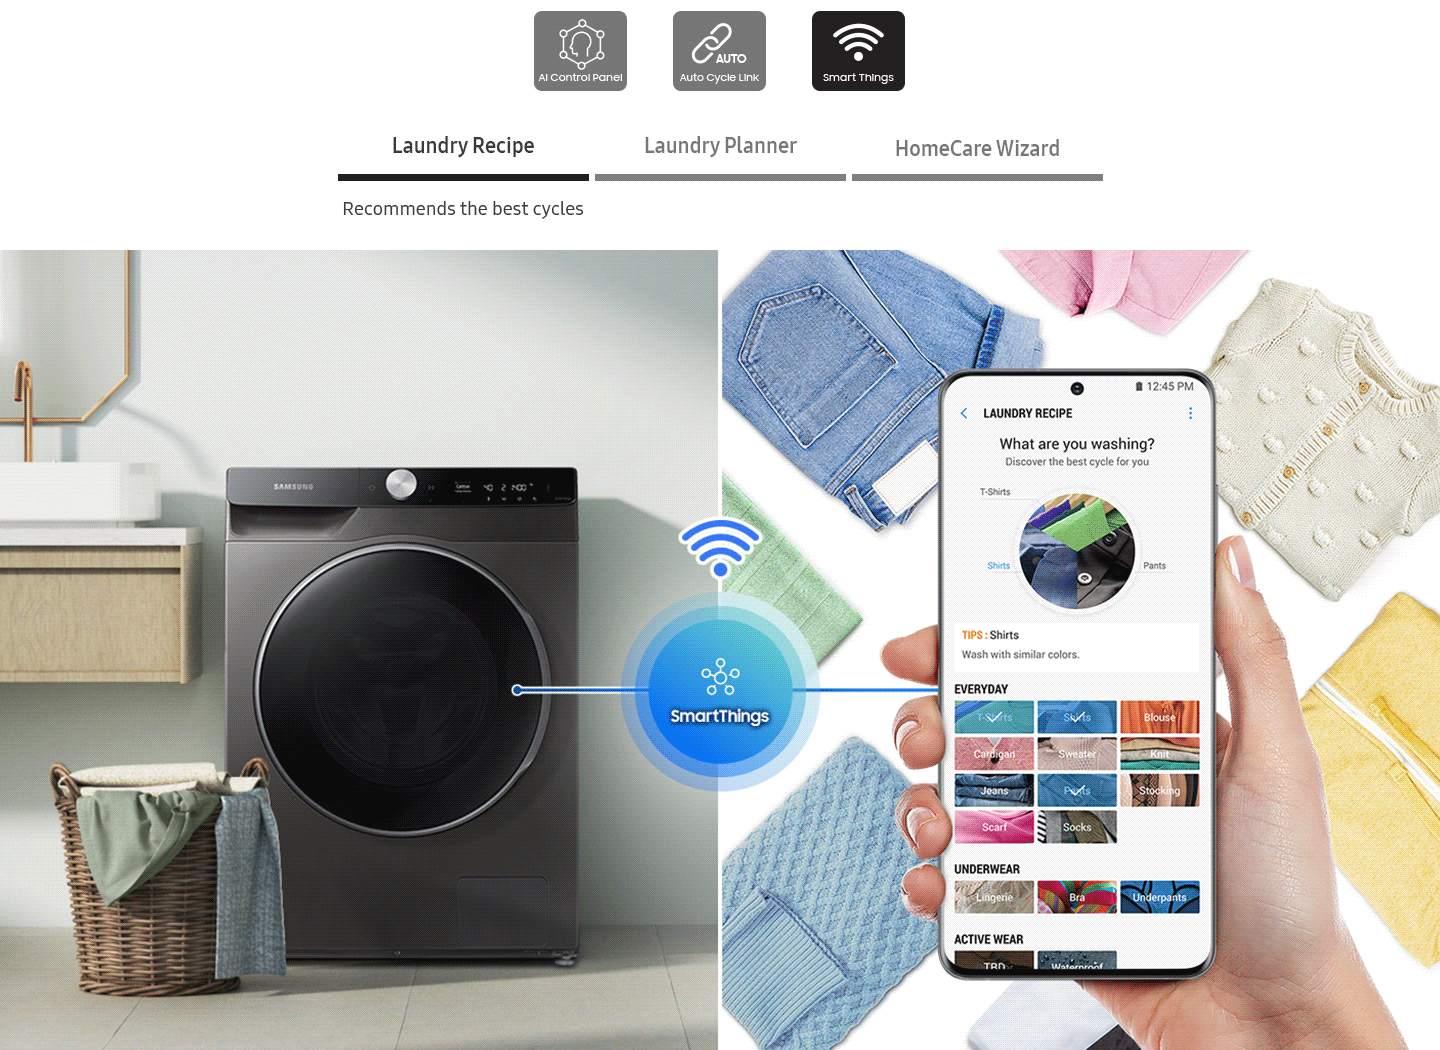 The SmartThings App is wi-fi based. Laundry recipe recommends the best cycles. Laundry planner curates your daily laundry plan. HomeCare Wizard helps self diagnosing and managing. Weather and location based Recommendation recommends cycle based on weather conditions.